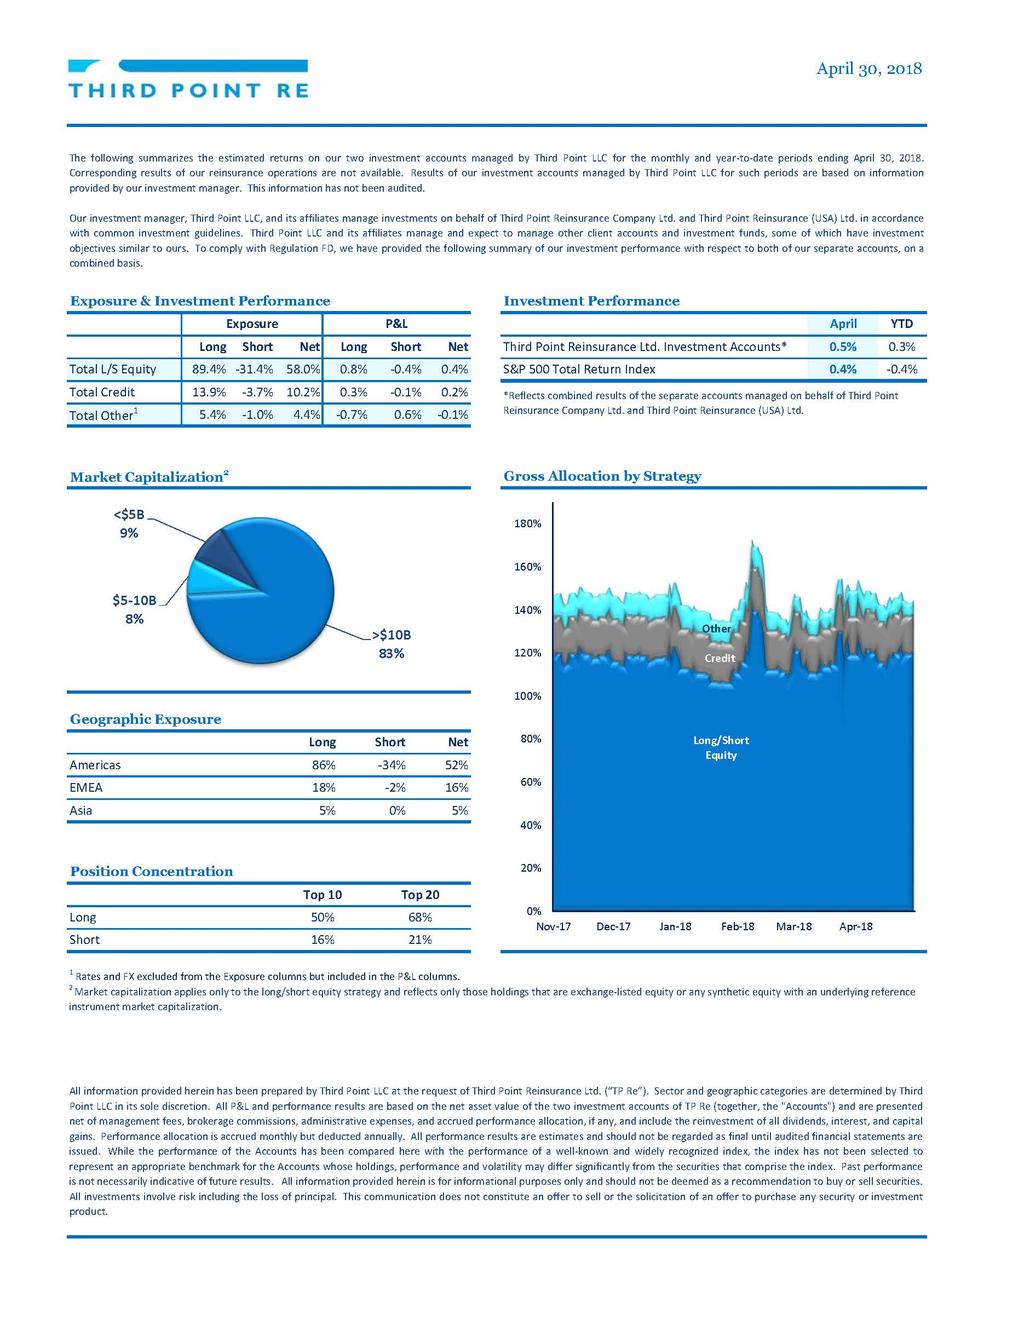 THIRD POINT LLC PORTFOLIO RISK MANAGEMENT Portfolio diversification across industries, geographies, asset classes and strategies Highly liquid portfolio investment manager can dynamically shift